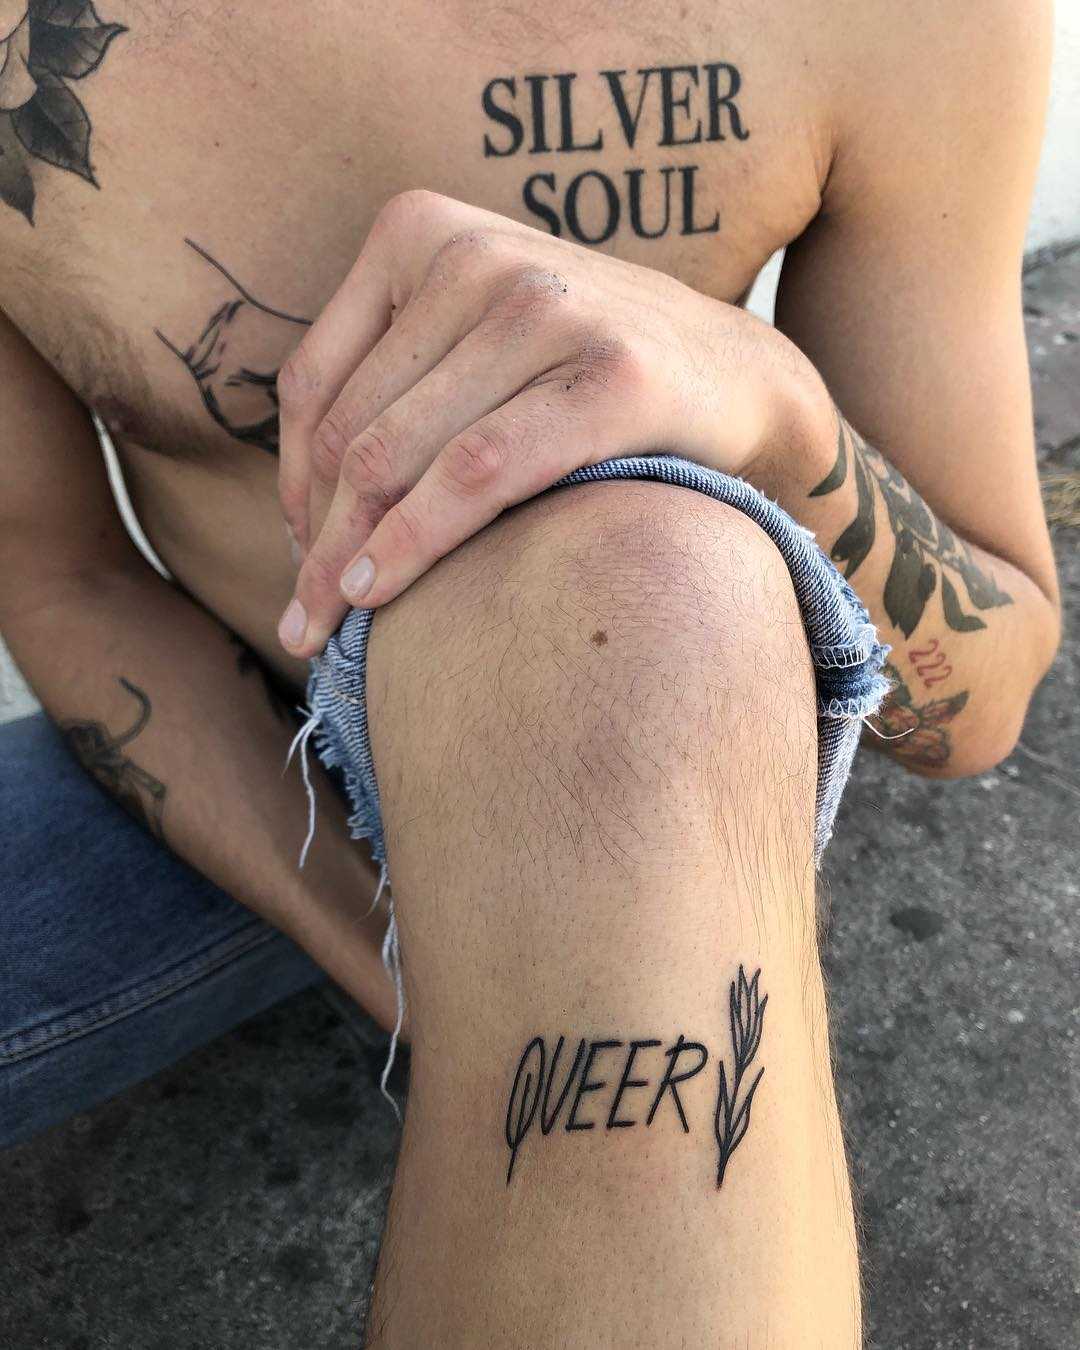 Queer tattoo by Tine DeFiore